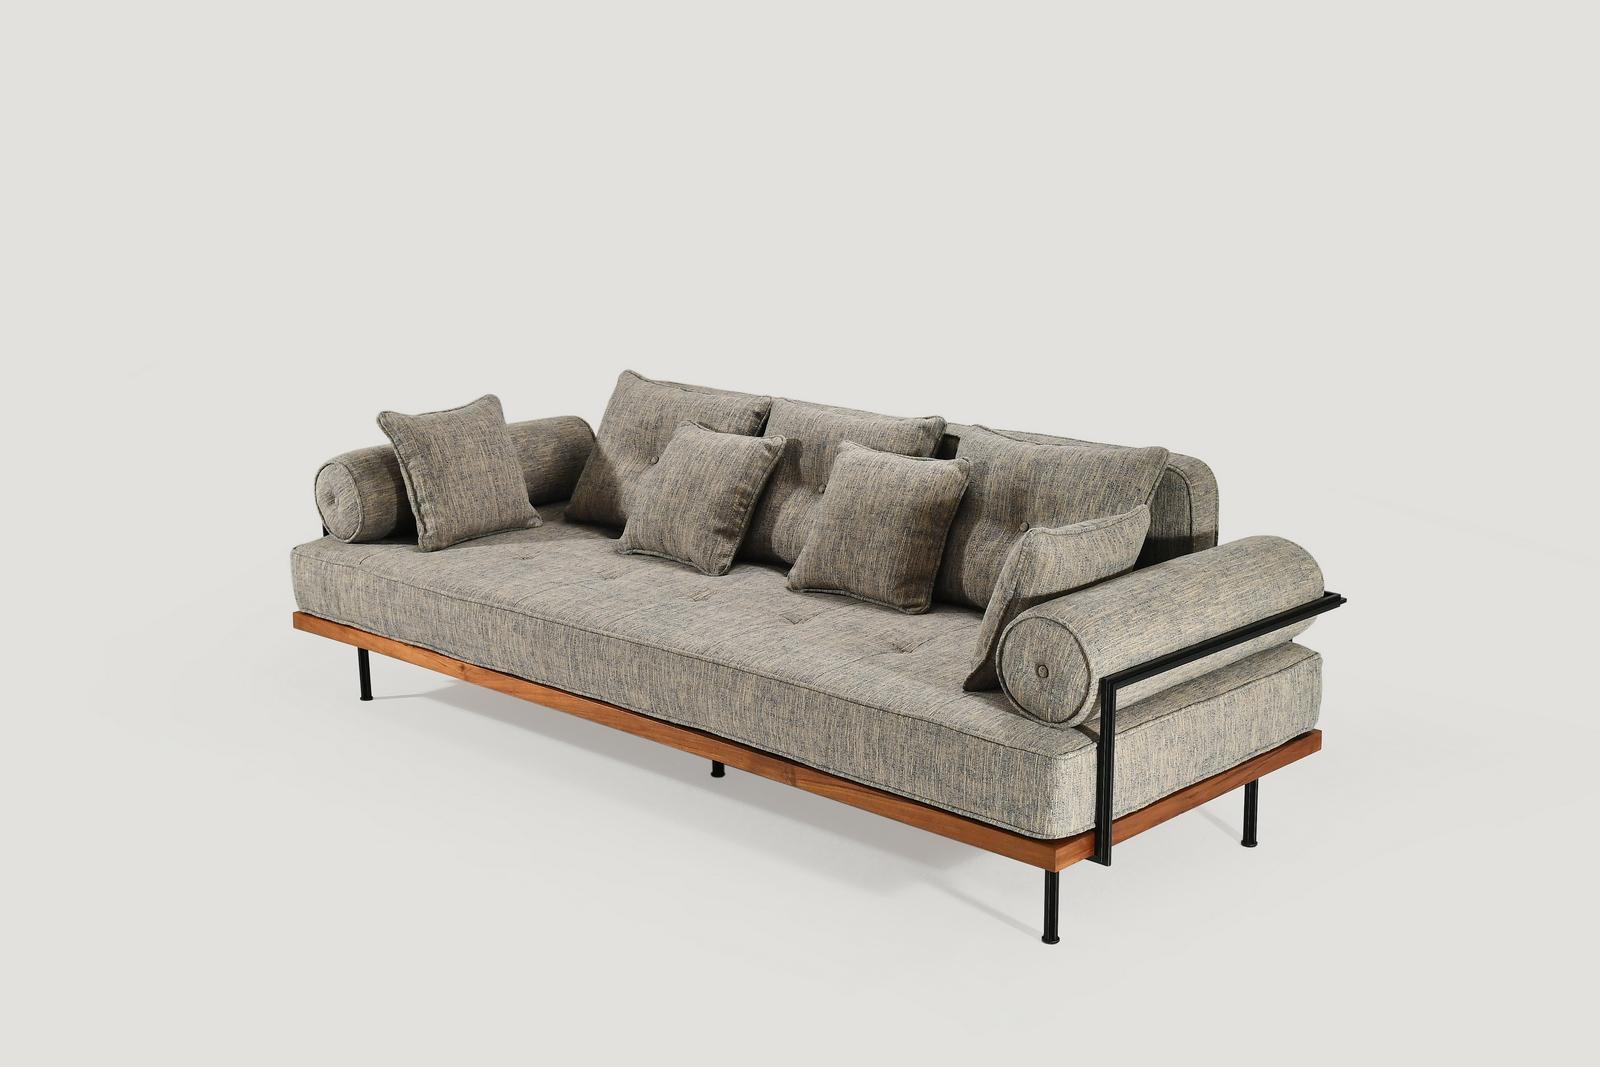 Model: PT70-BS3-TE-DO three-seat sofa
Dimensions: 225 x 87 x 70 cm; seat height 38.5cm.
(W x D x H) 88.58 x 34.25 x 27.56 inch; seat height 15.16 inch.
Frame: Reclaimed hardwood
Frame finish: Diamond Oil
Structure: Extruded and hand-welded solid